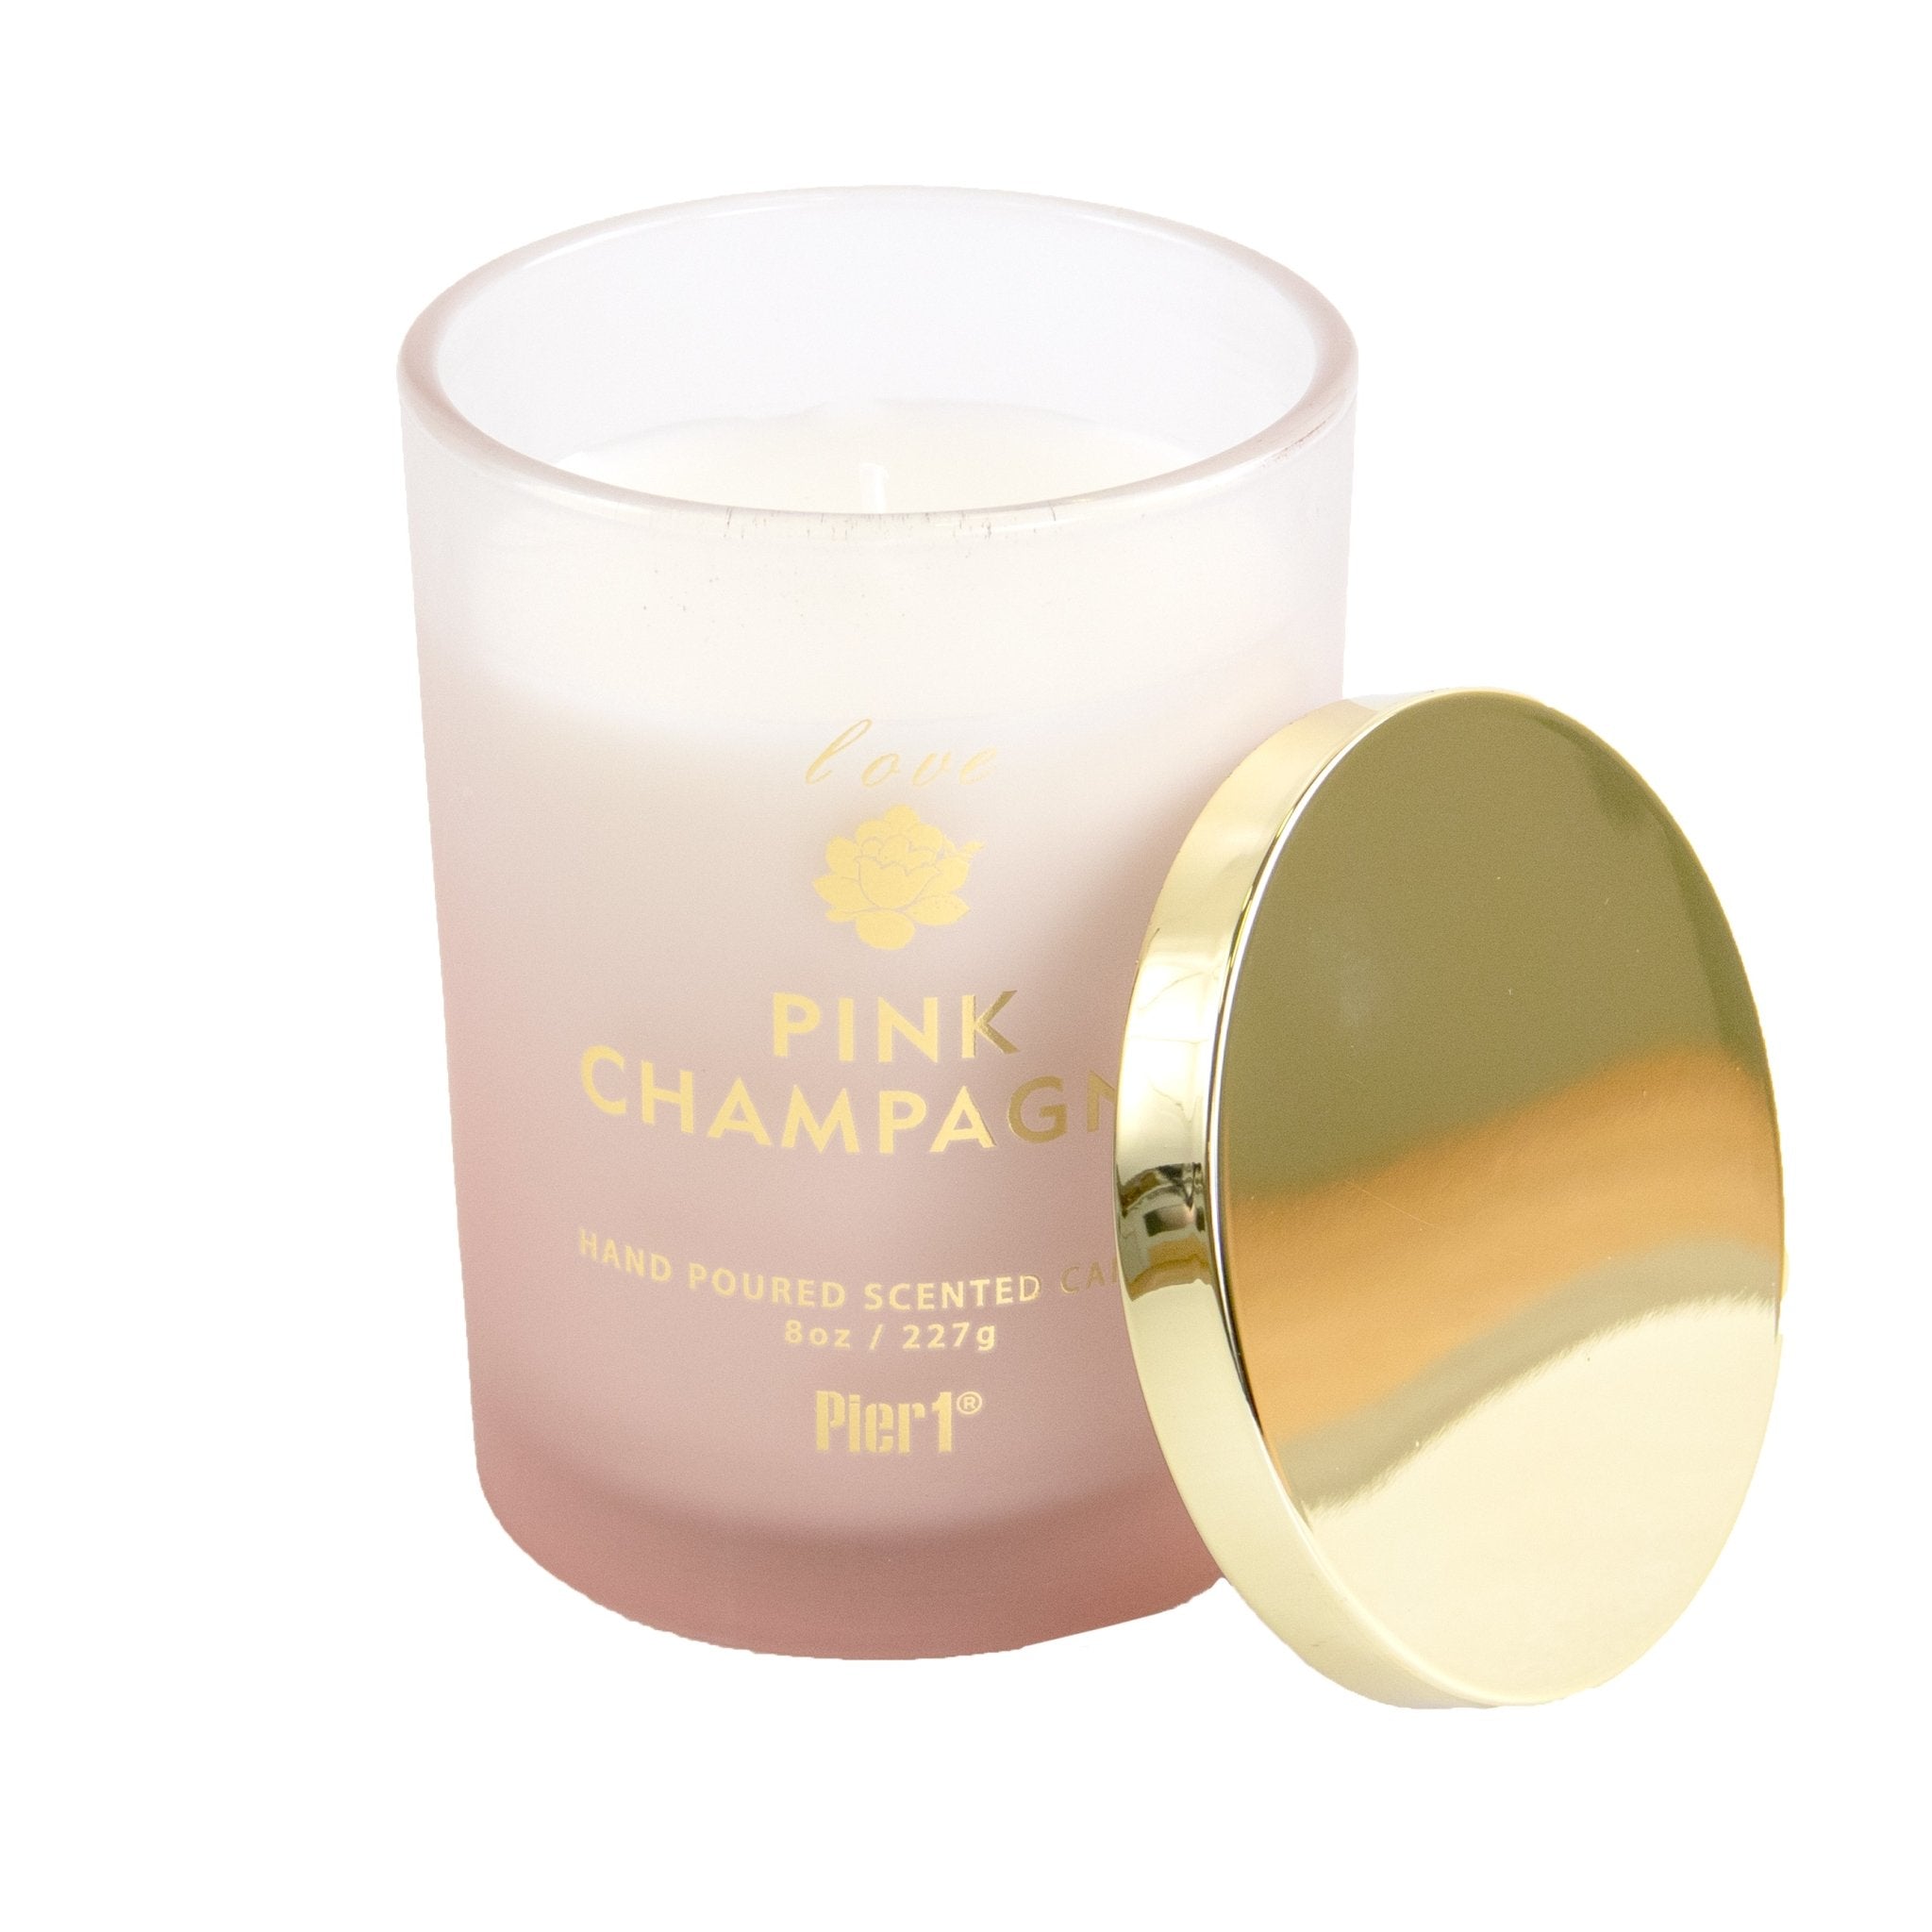 Pier-1-Pink-Champagne-8oz-Ombre-Filled-Candle-Candles